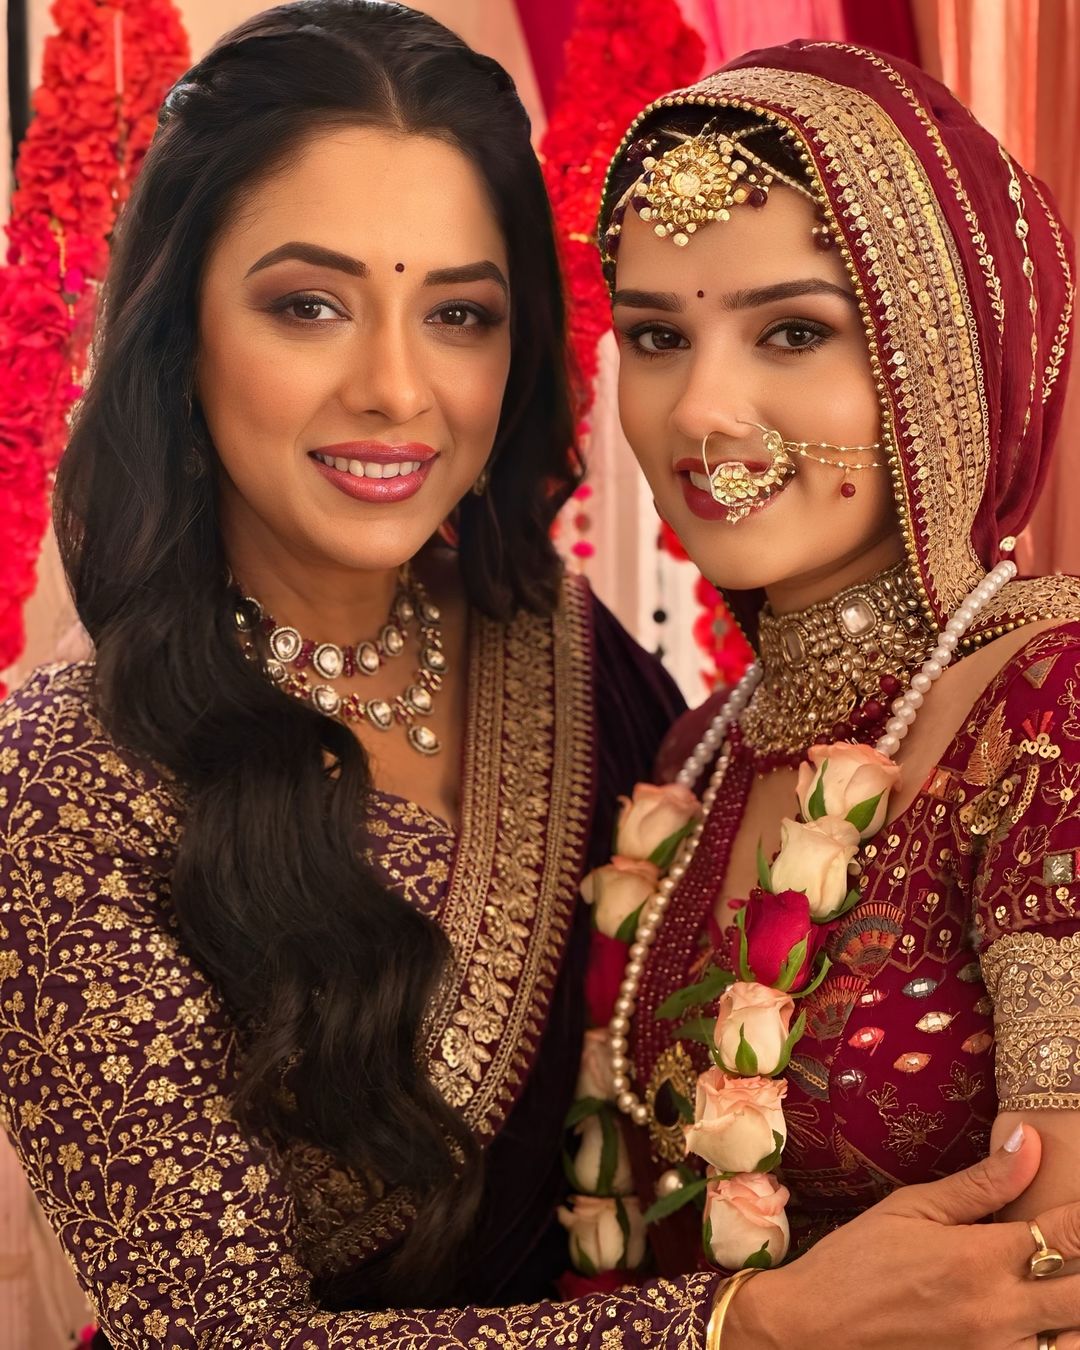 Wedding Sequence Photos: Rupali Ganguly and Nishi Saxena beautiful photos from the sets of Anupamaa; See BTS Pictures of Heartfelt Photos 